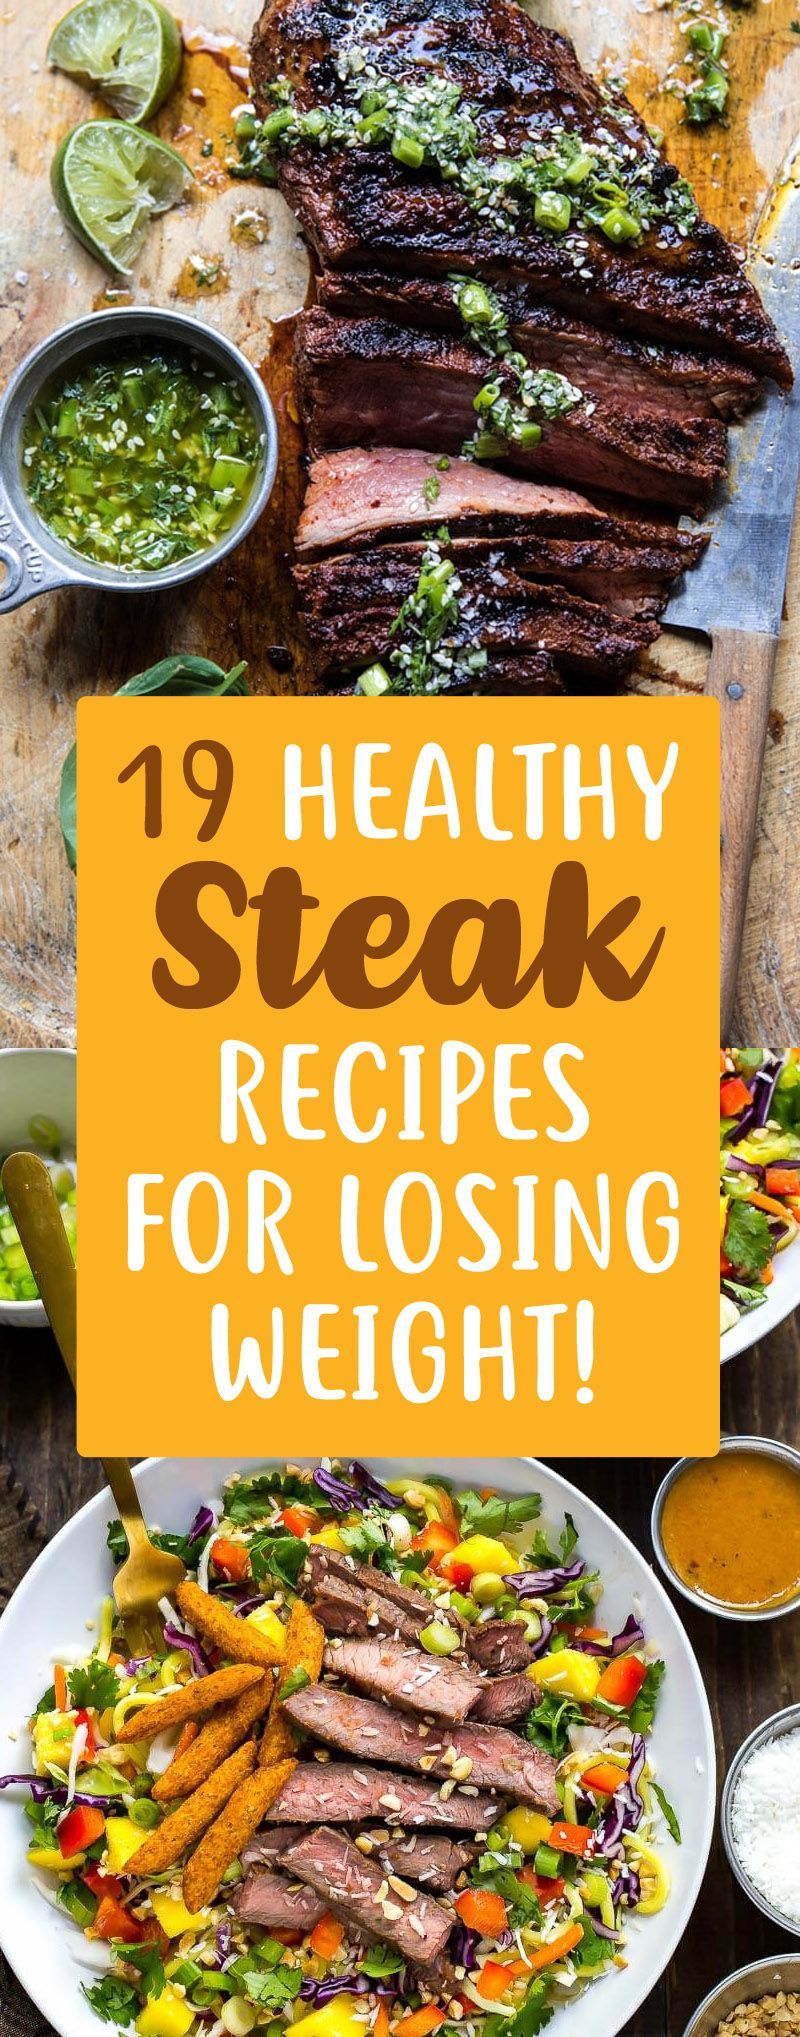 19 Weight Loss Steak Recipes That Are Packed Full Of Protein! -   14 healthy recipes steak
 ideas